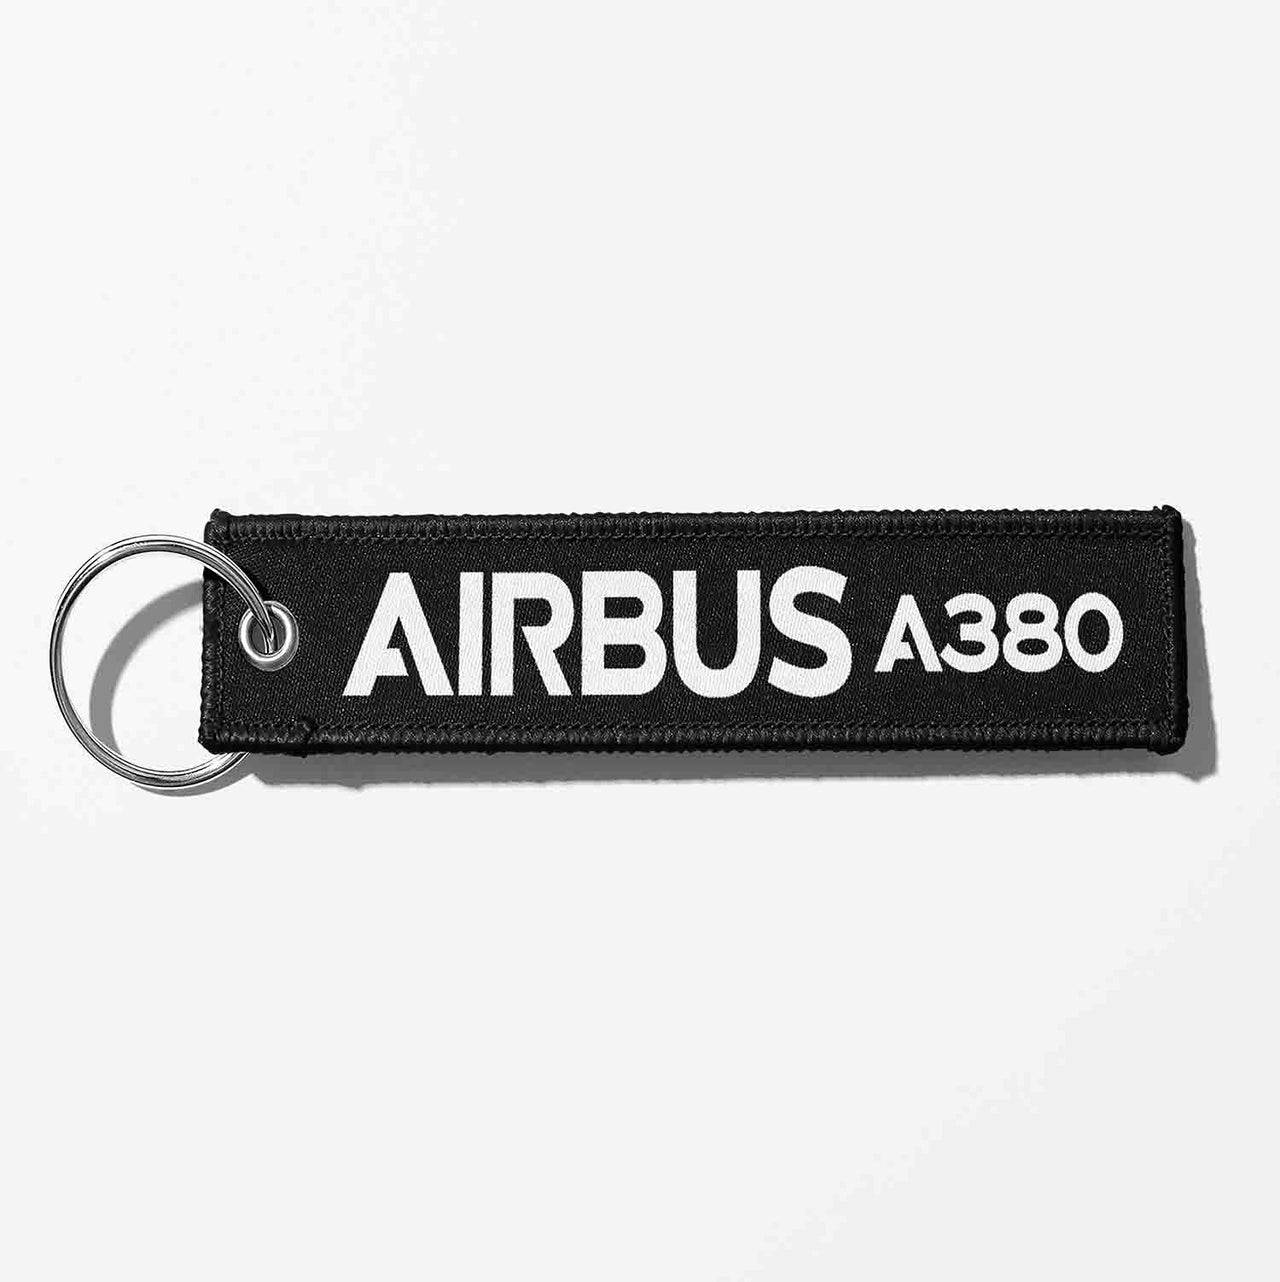 Airbus A380 & Text Designed Key Chains